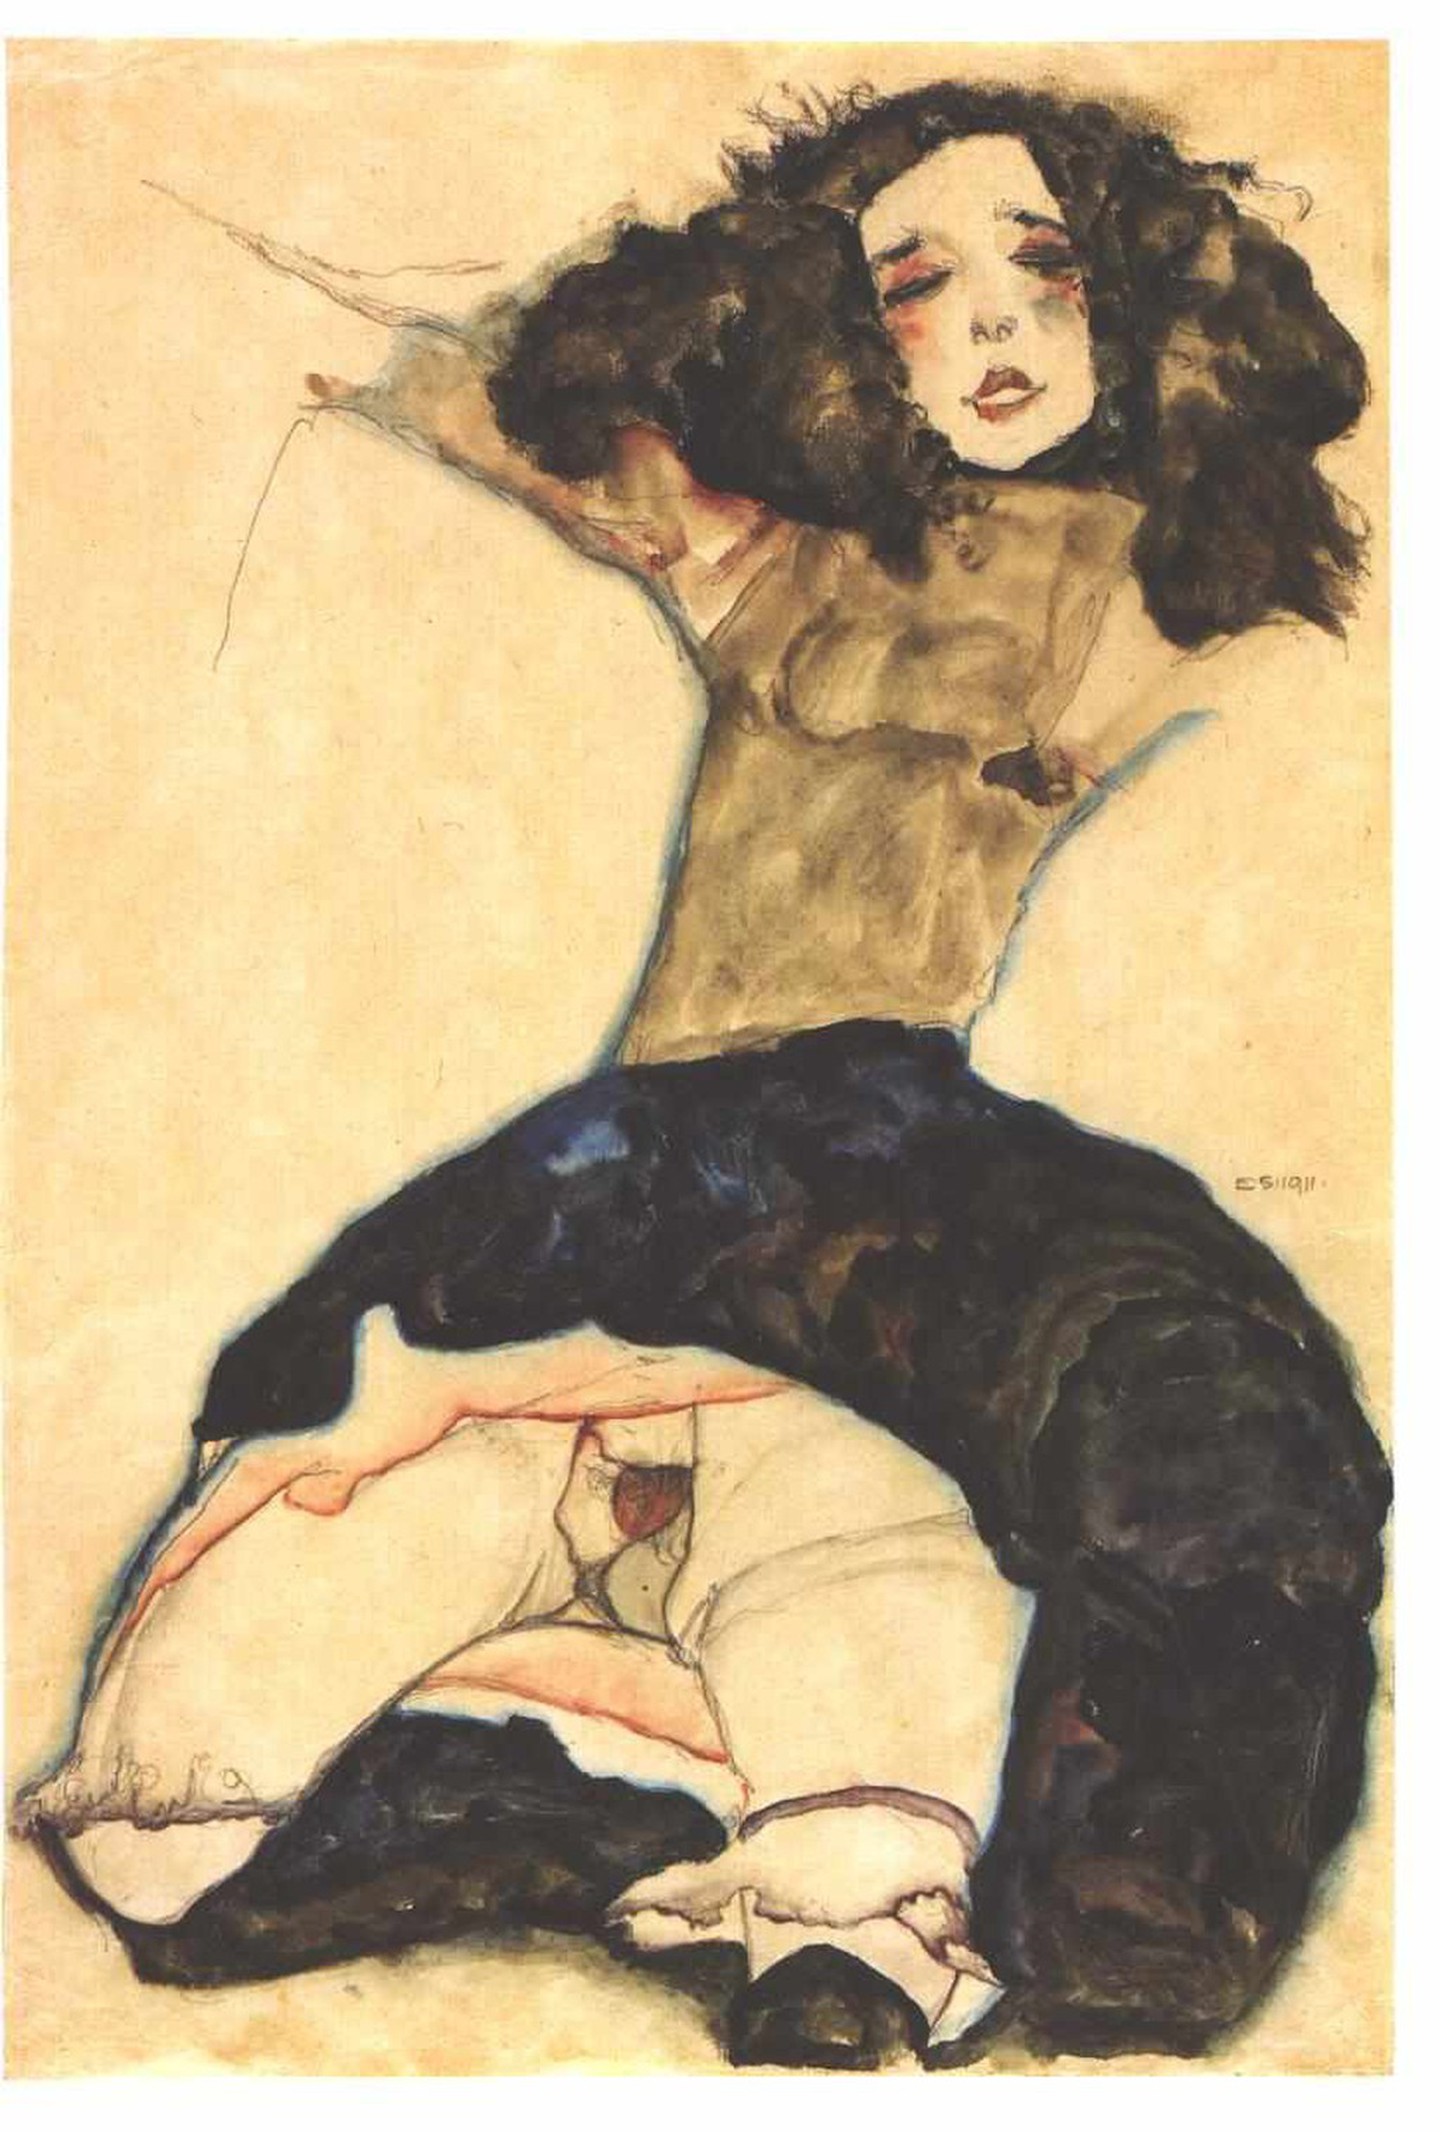 Egon Schiele, ‘Black-Haired Girl With Lifted Skirt’, 1911 | © Leopold Museum 